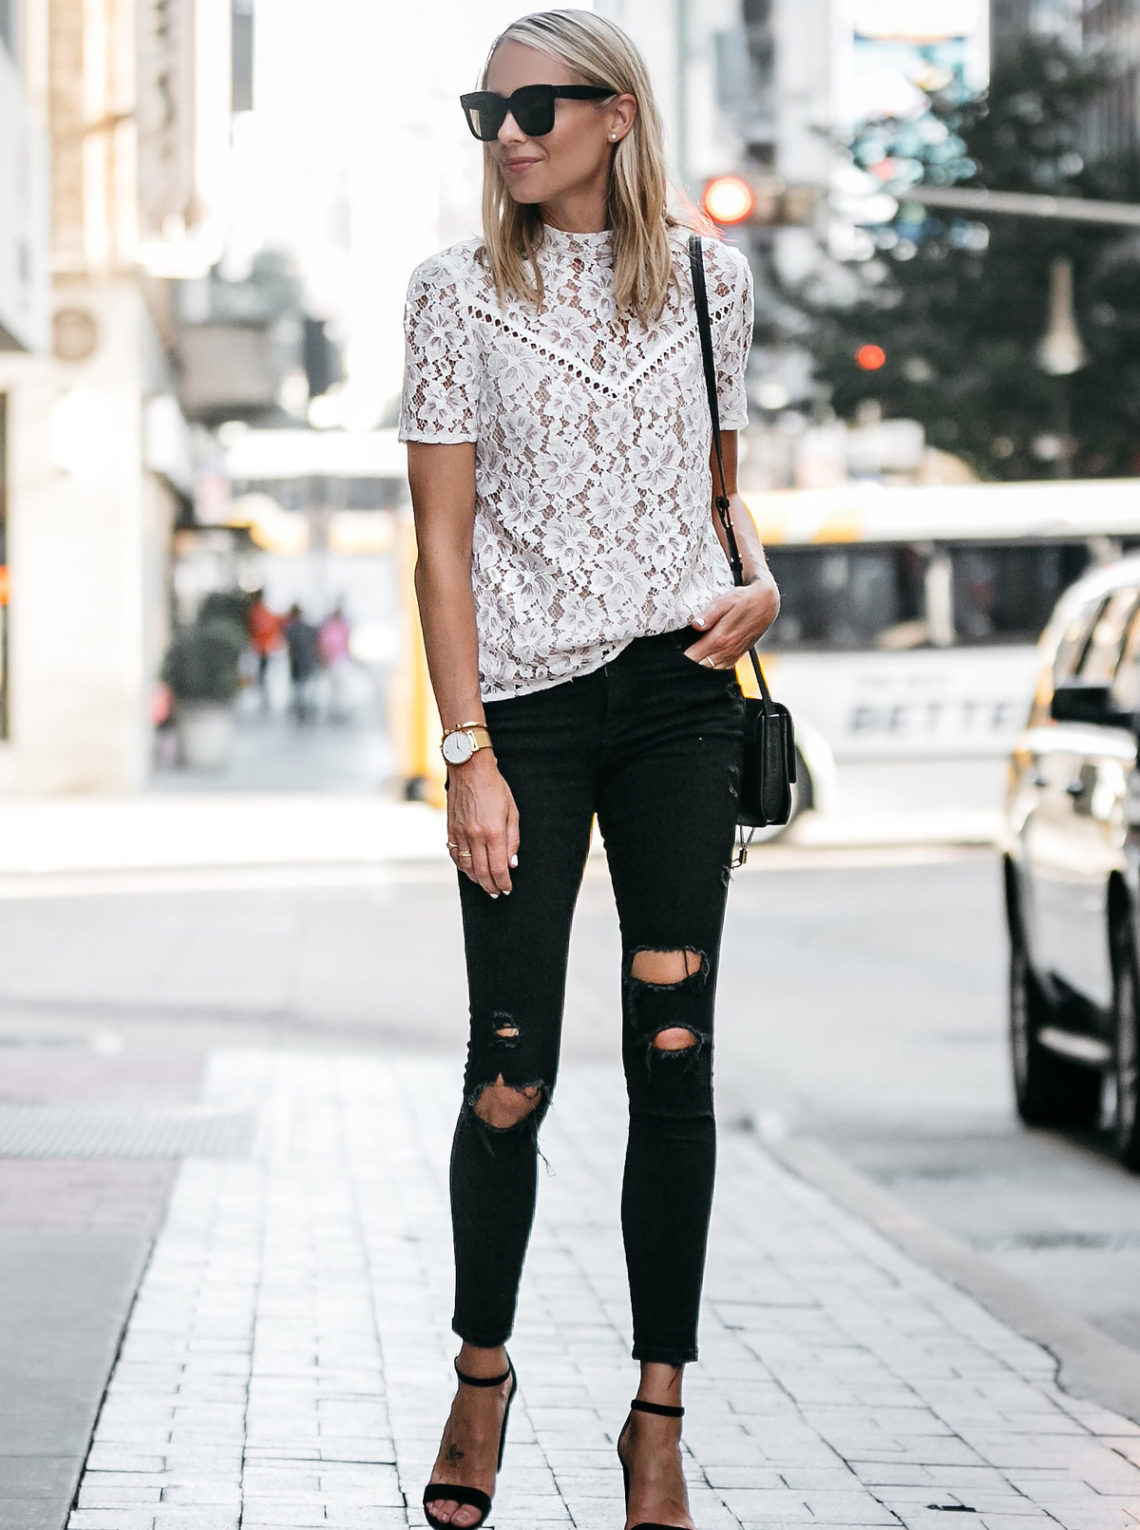 Blonde Woman Wearing Nordstrom Anniversary Sale White Lace Top Zara Black Ripped Skinny Jeans Outfit Black Ankle Strap Heeled Sandals Chloe Faye Handbag Fashion Jackson Dallas Blogger Fashion Blogger